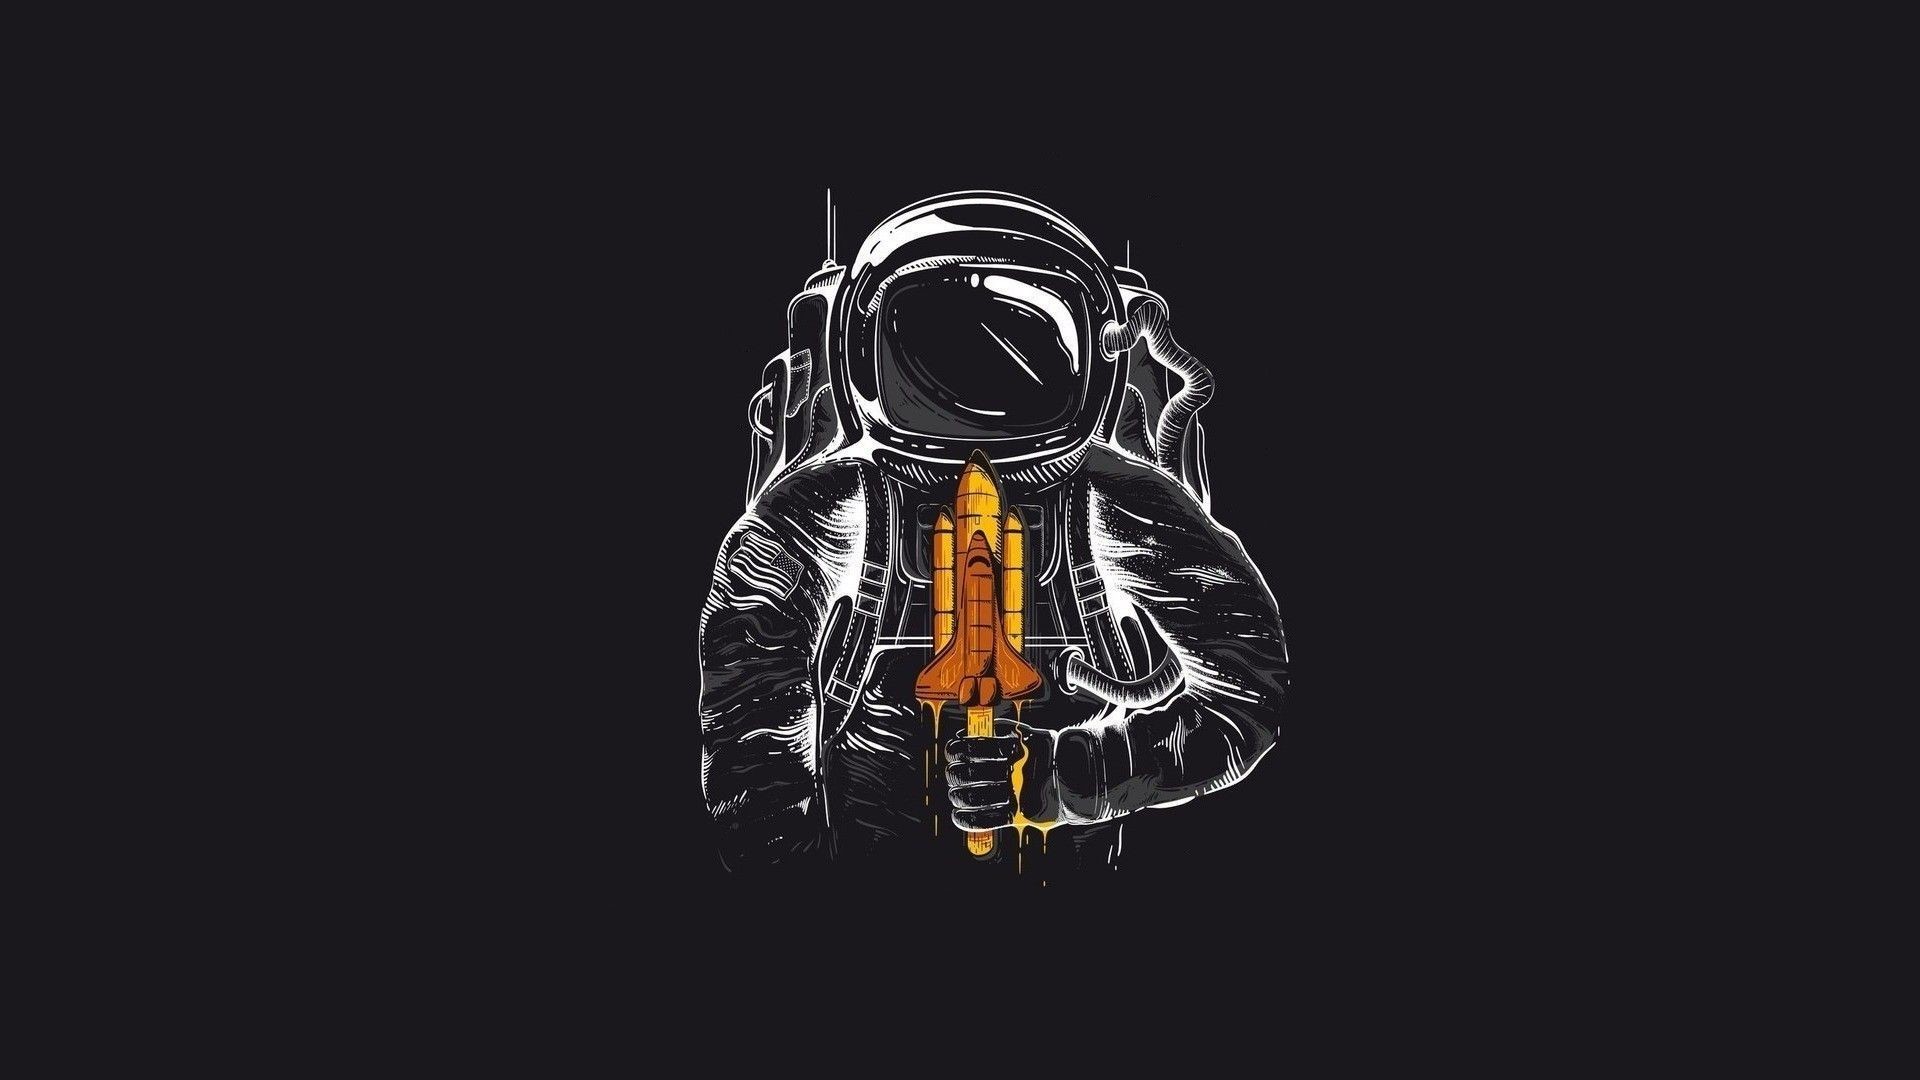 1920x1080 Astronaut with space shuttle popsicle Wallpaper